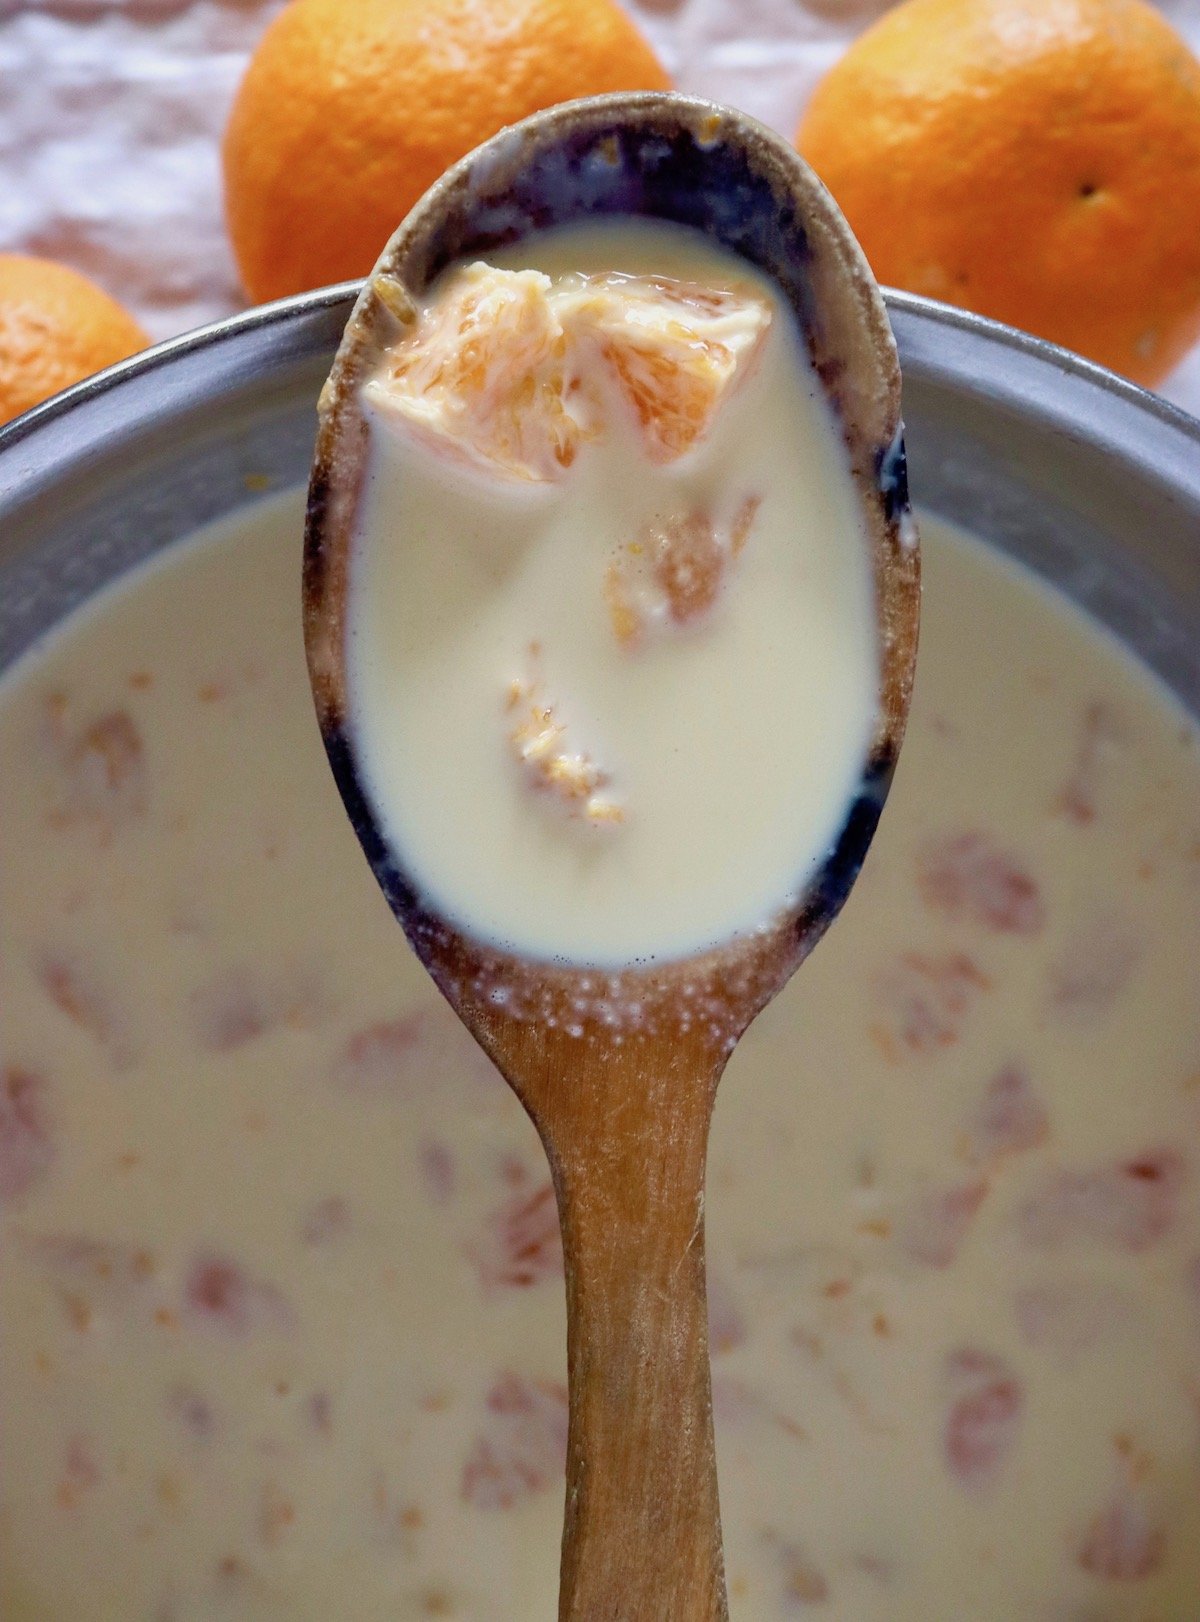 Wooden spoon with custard and tangerine pieces over a stainless steel bowl with more of it.